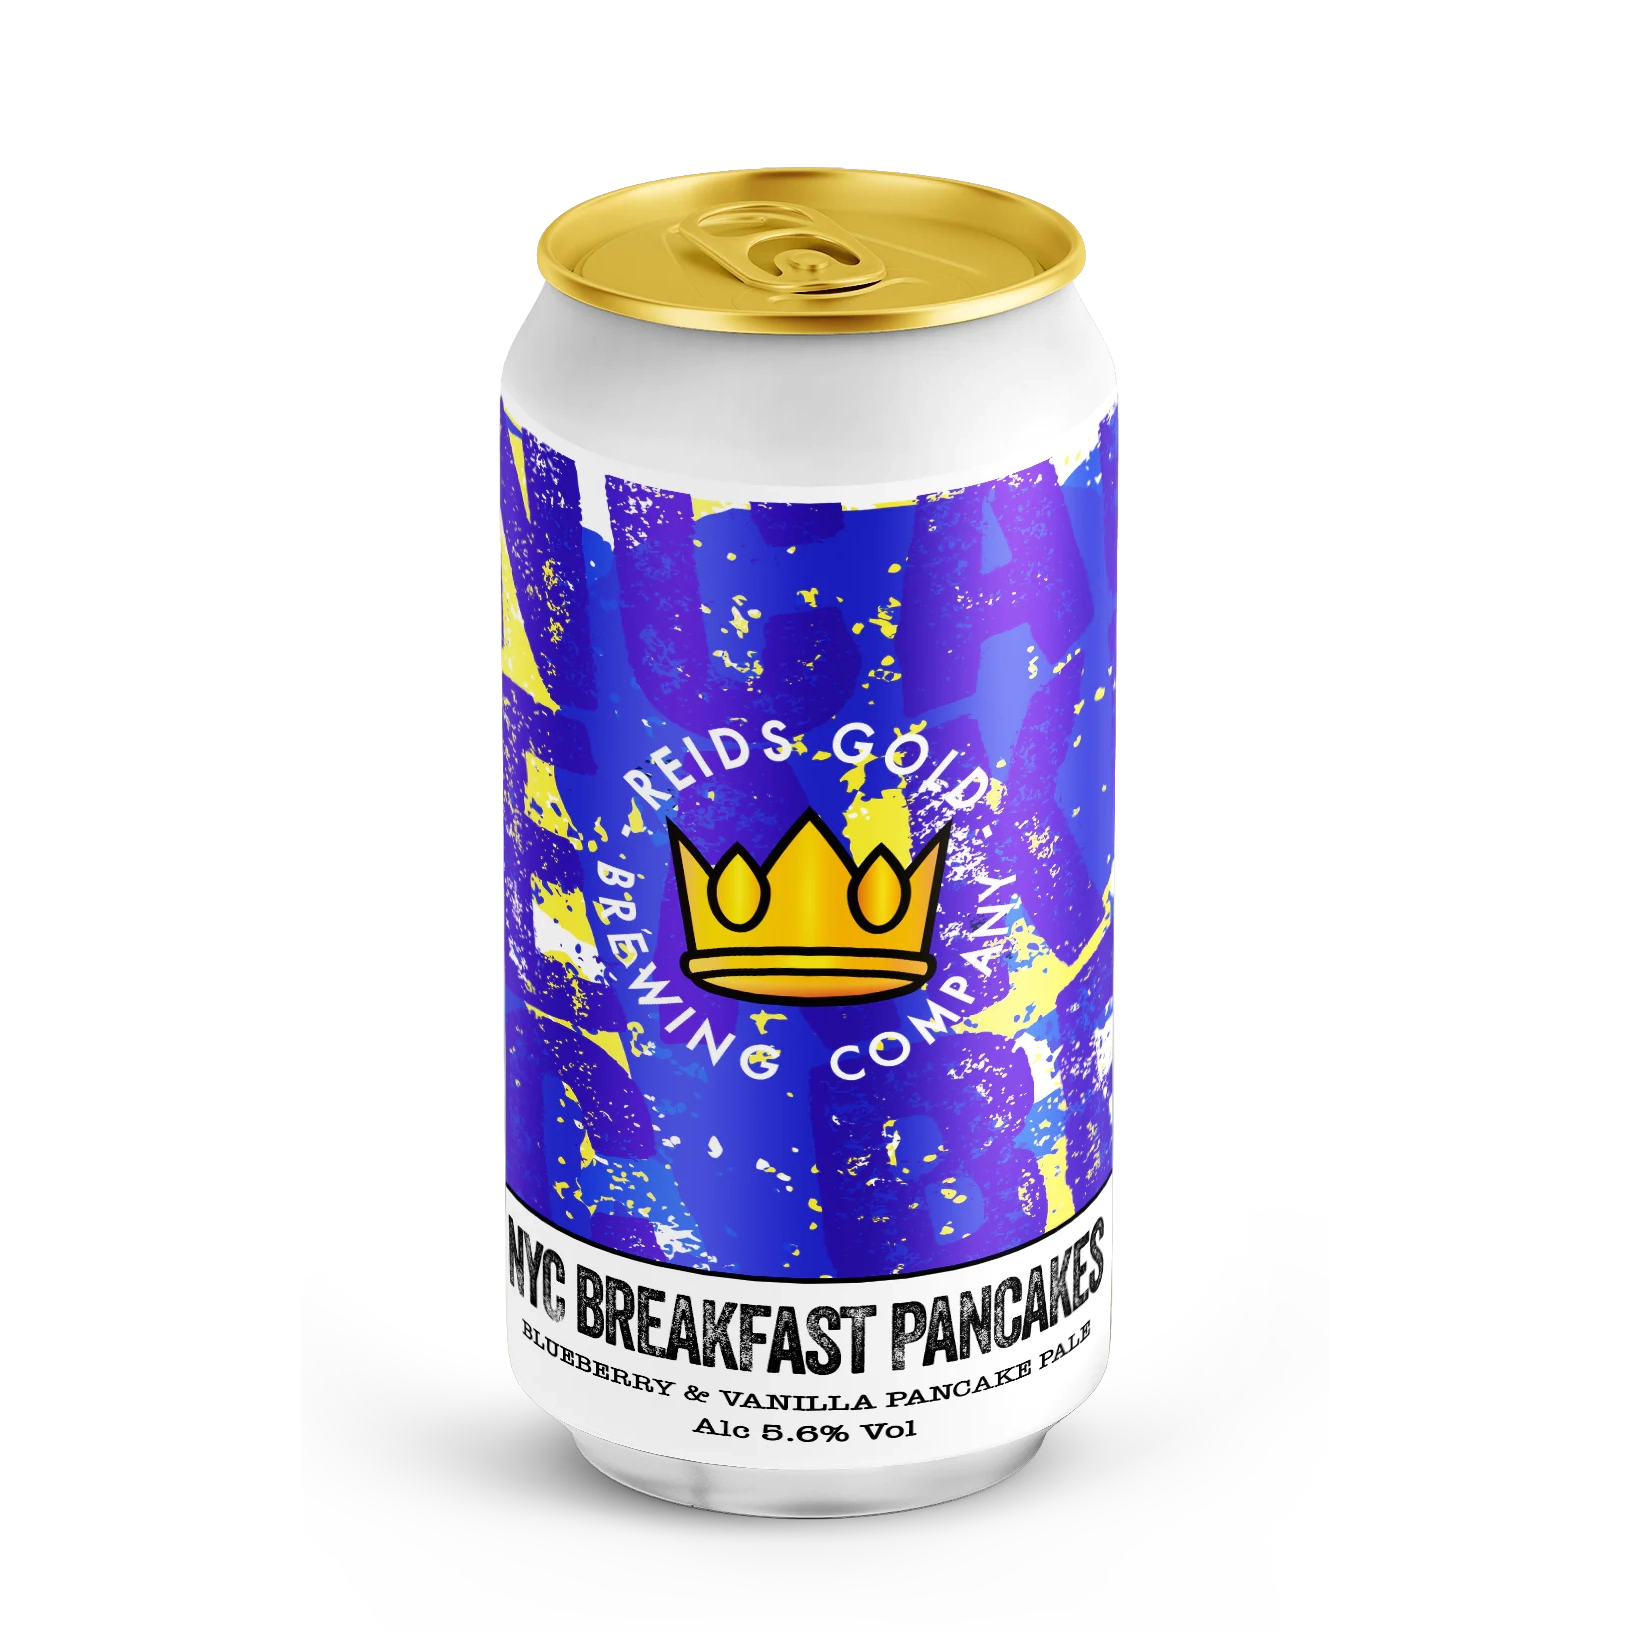 Reids Gold NYC Breakfast Pancakes - Blueberry & Vanilla Pancake Pale 440ml Can-Scottish Beers-9503827453253-Fountainhall Wines